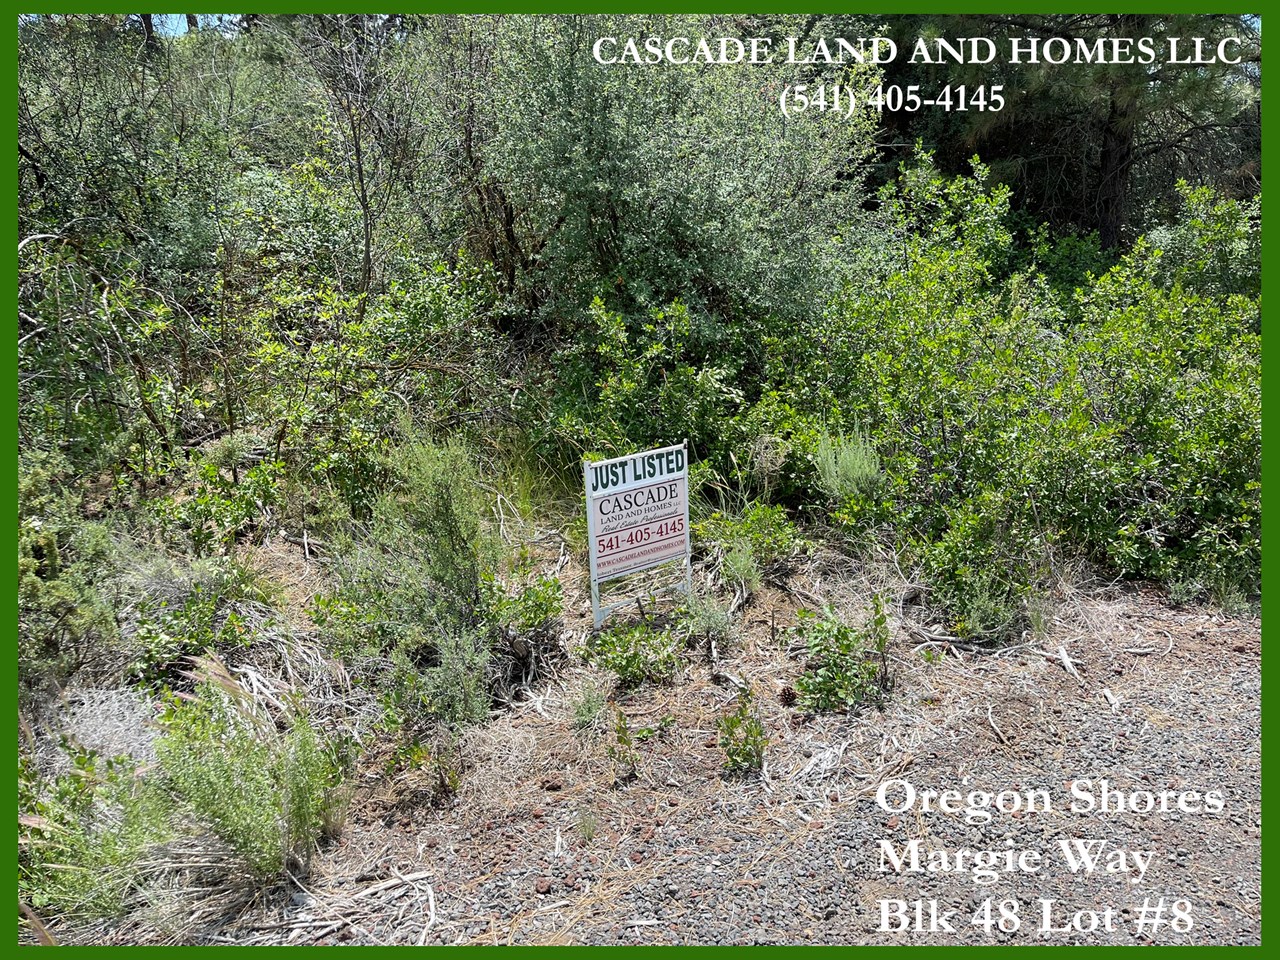 the lot next door to this one is also for sale by the same owner. make an offer on both for an even larger property to build your new home!